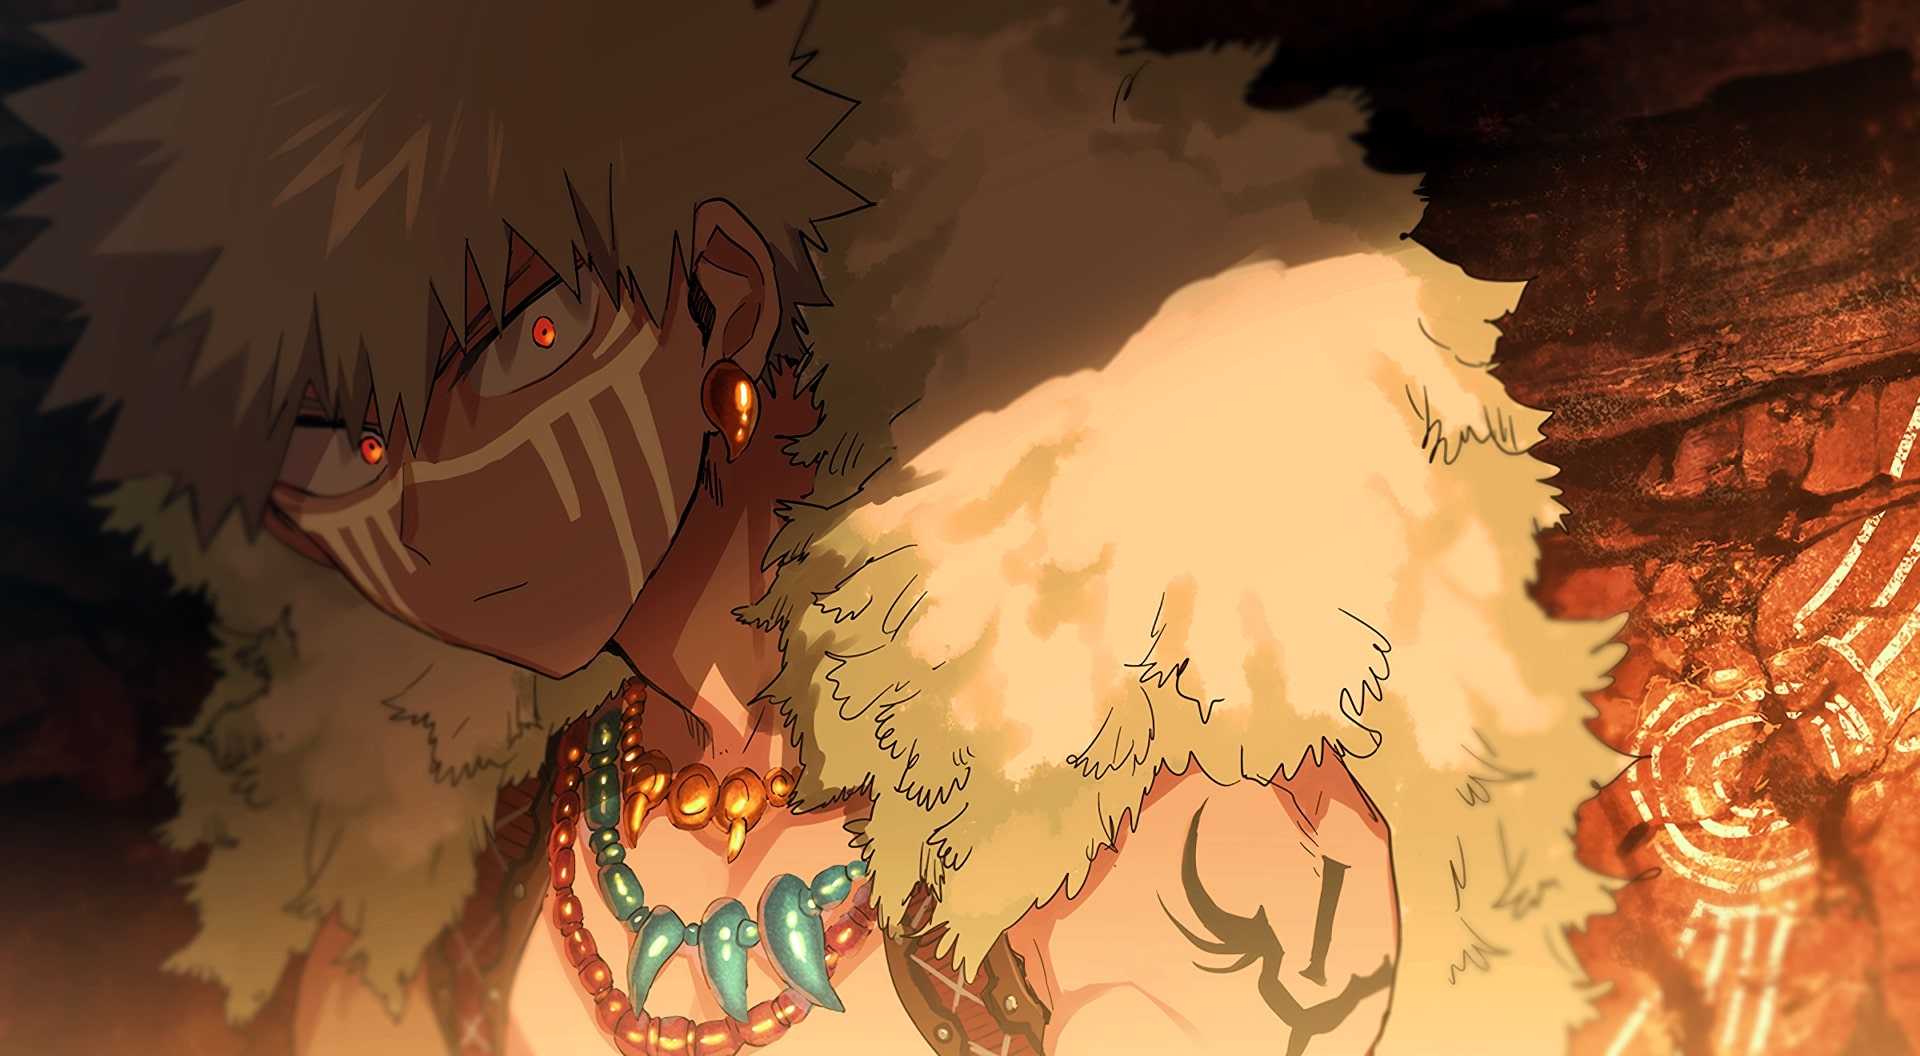 An anime character with brown hair and brown eyes, wearing a white fur coat and a necklace of turquoise beads with red stones - Bakugo